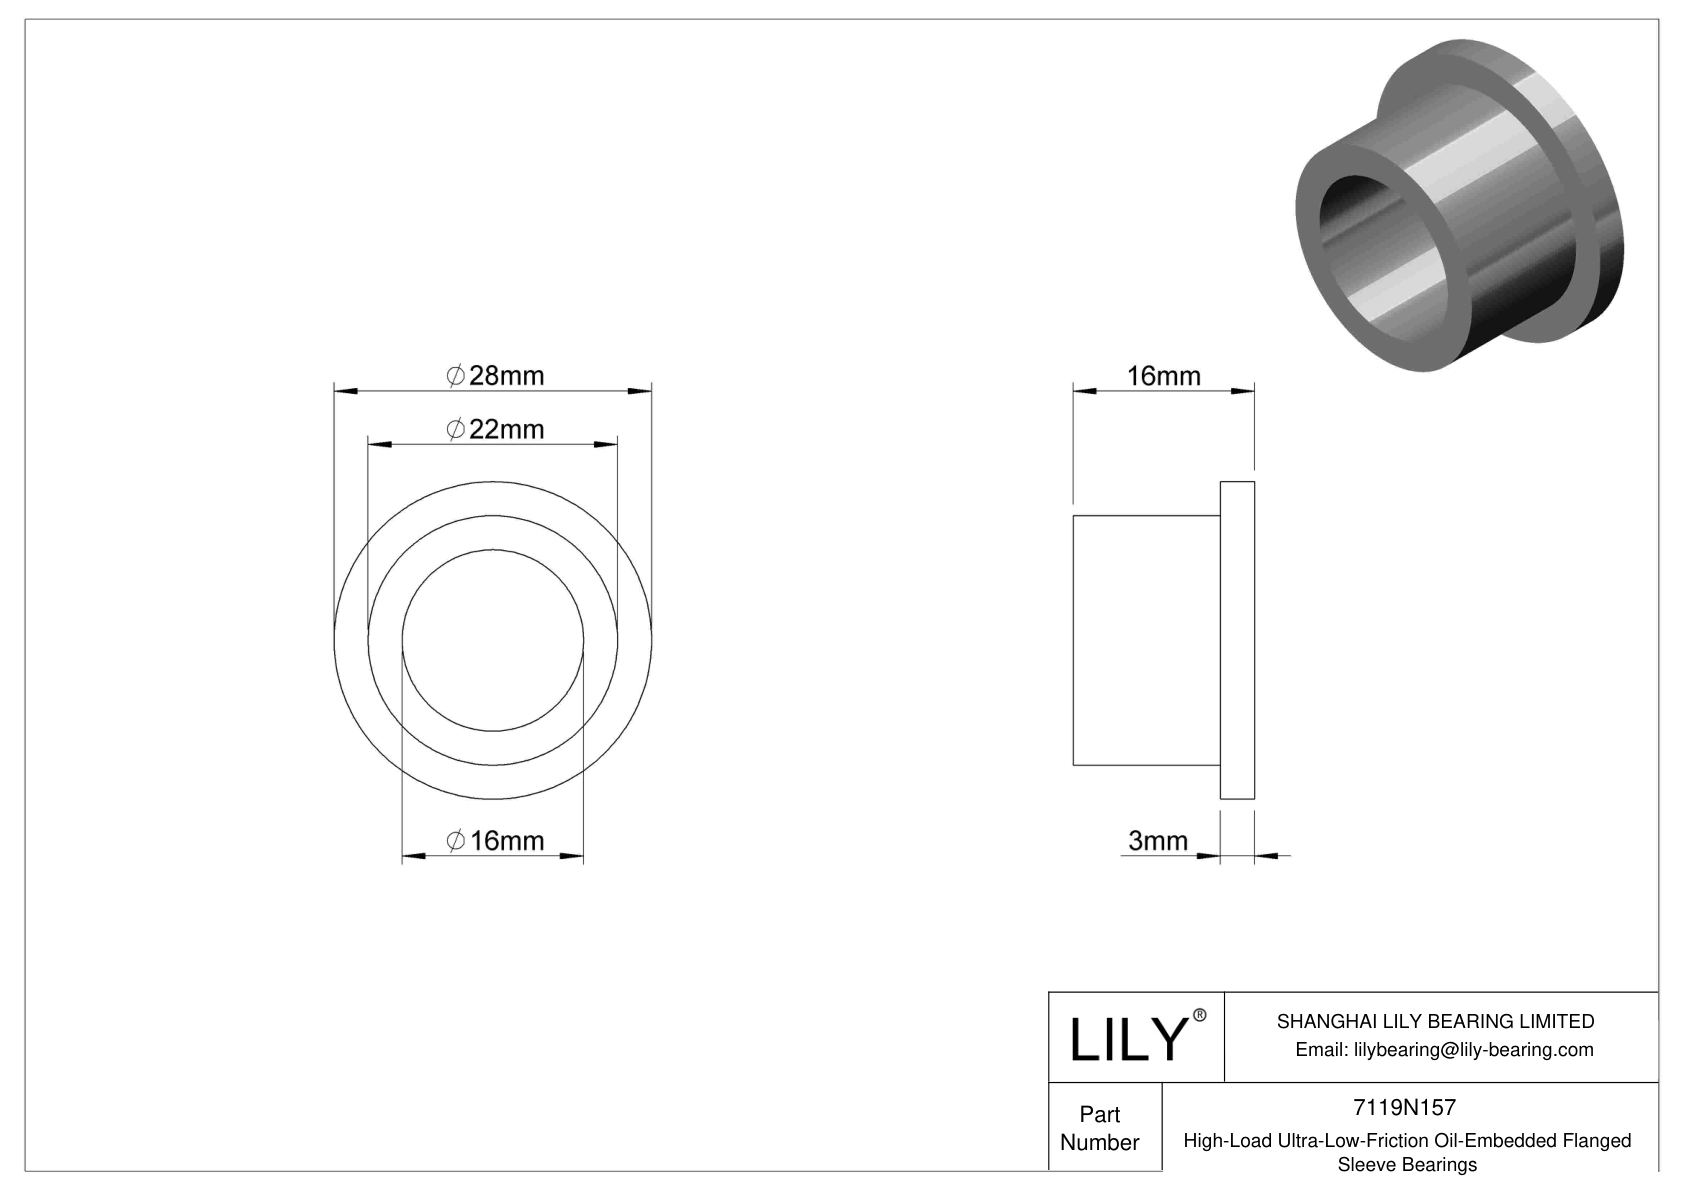 HBBJNBFH High-Load Ultra-Low-Friction Oil-Embedded Flanged Sleeve Bearings cad drawing